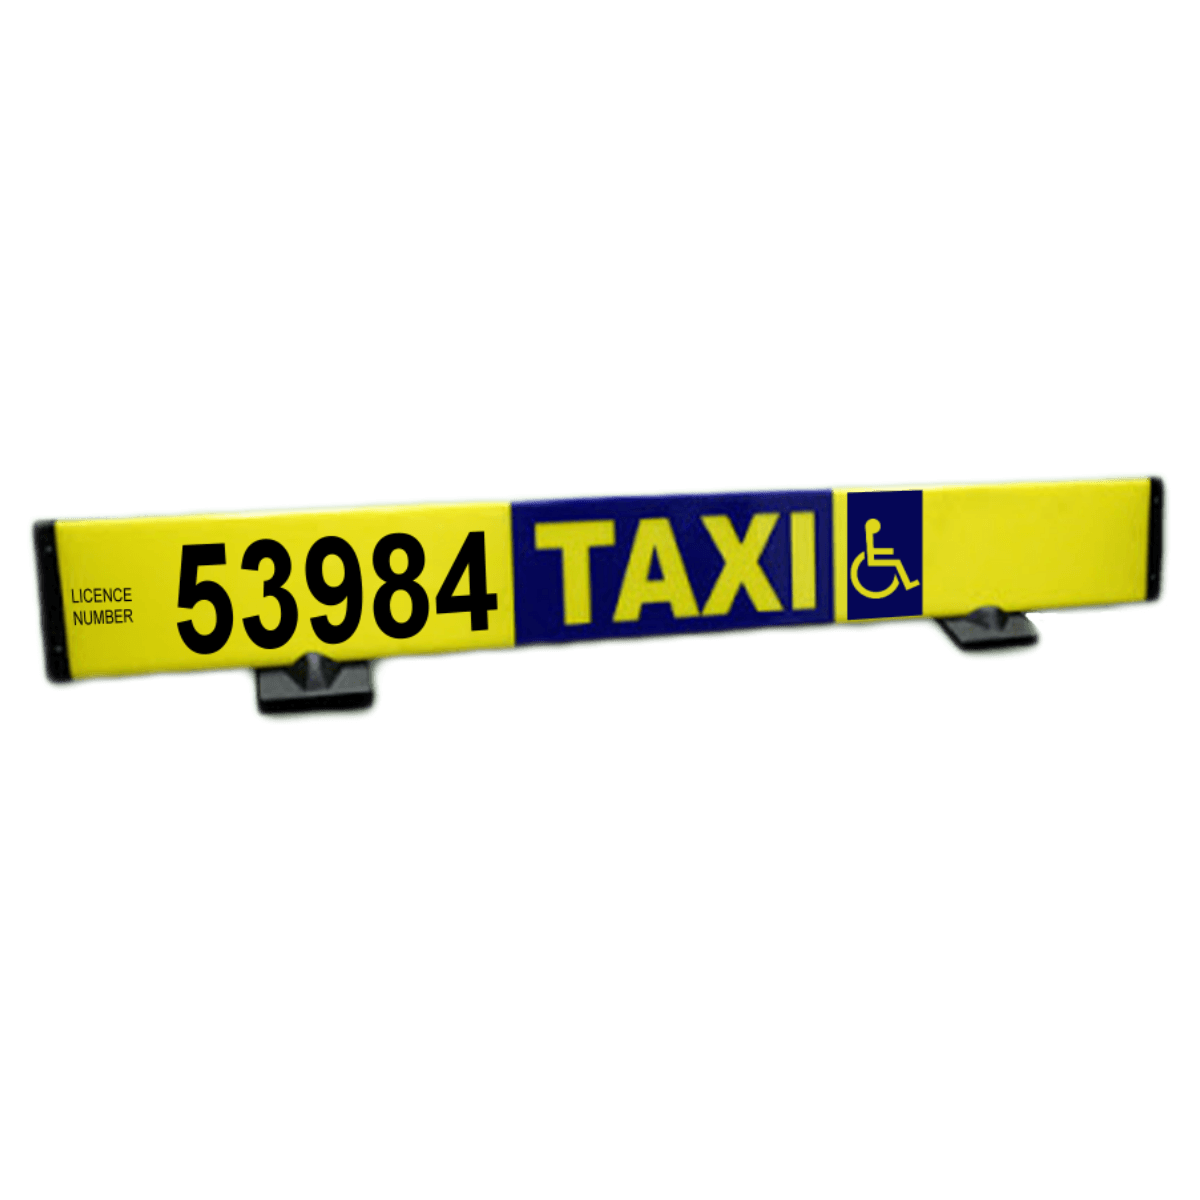 refurbished taxi roofsign